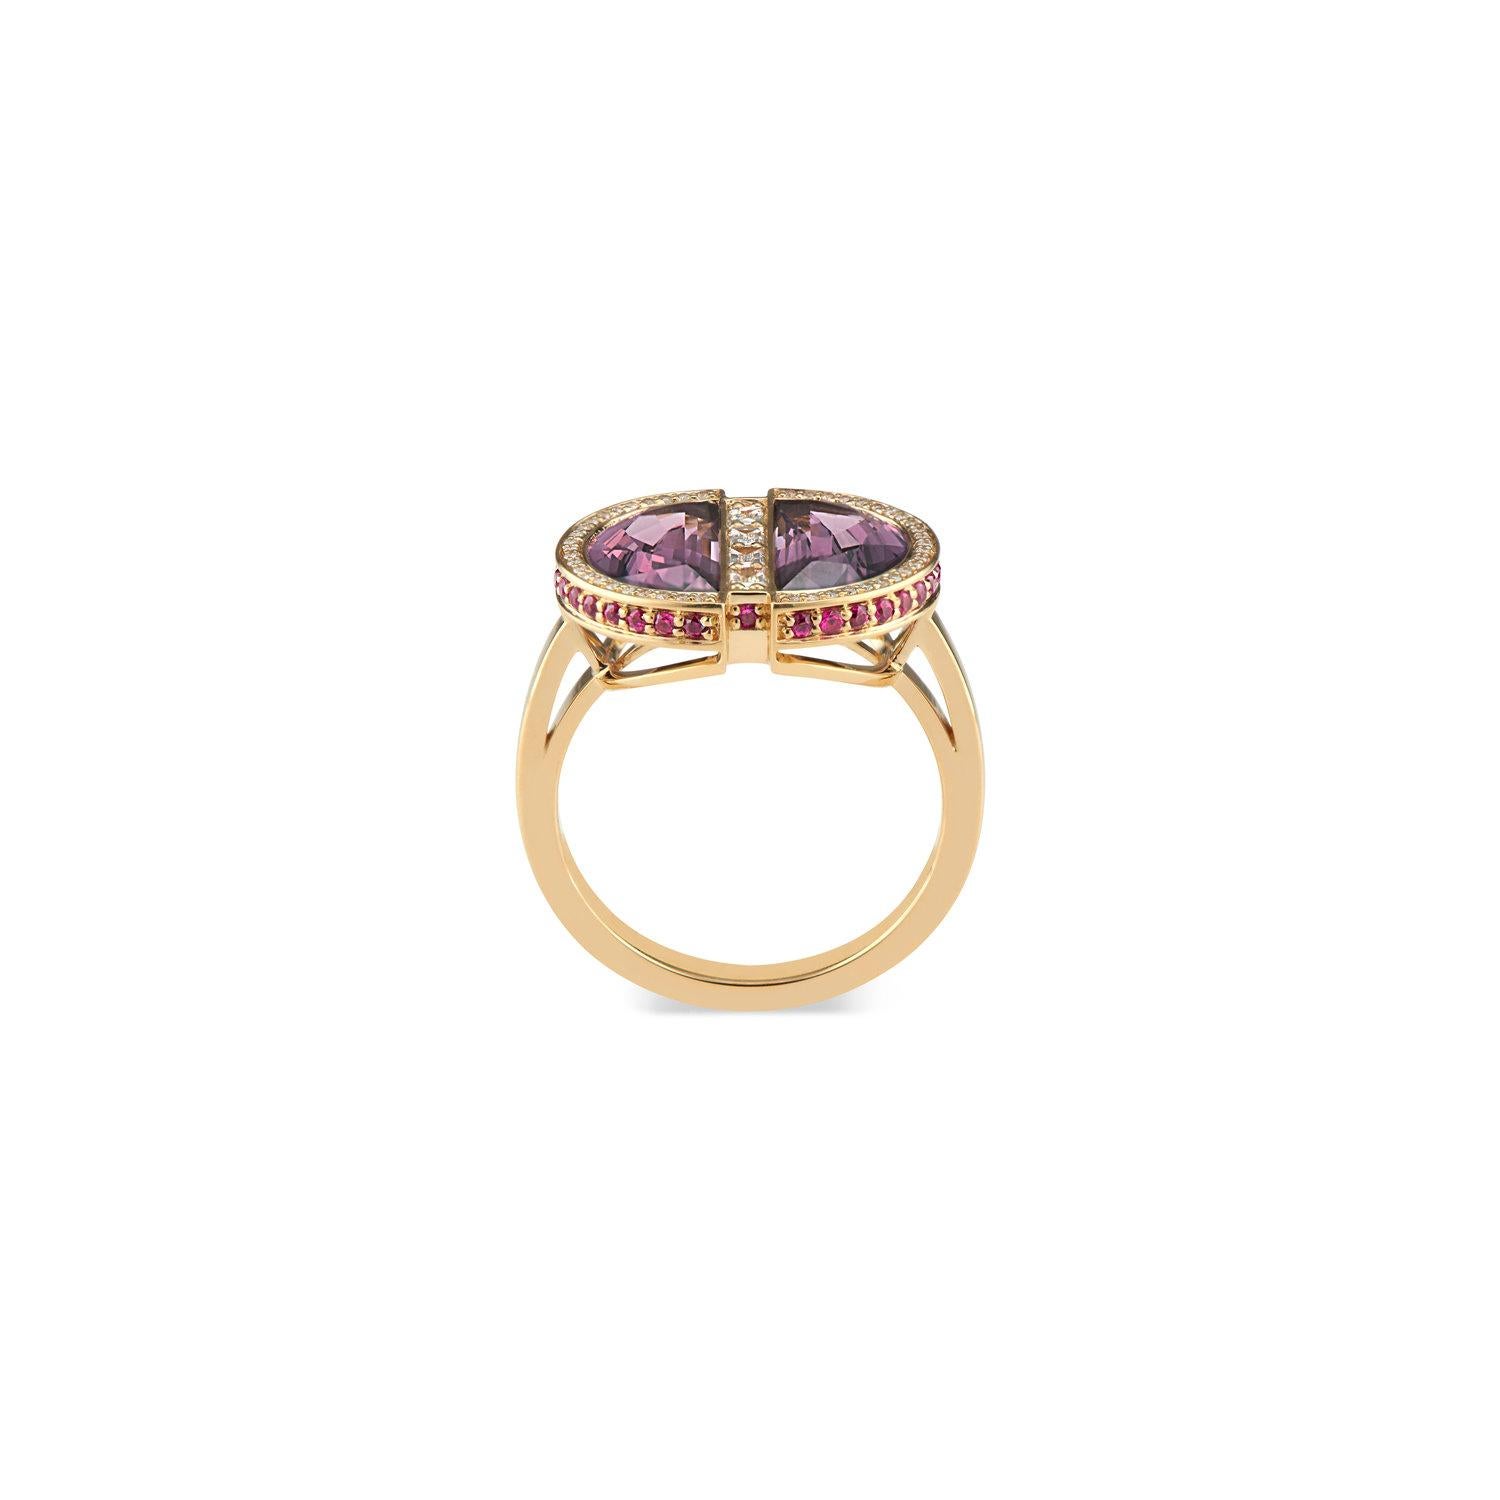 With its captivating rich coloration and striking geometric form, Ri Noor's Half Moon Spinel, Ruby and Diamond Ring continues the brand's philosophy of creating statement-making jewelry that transitions between day and night. Two half moon spinels,